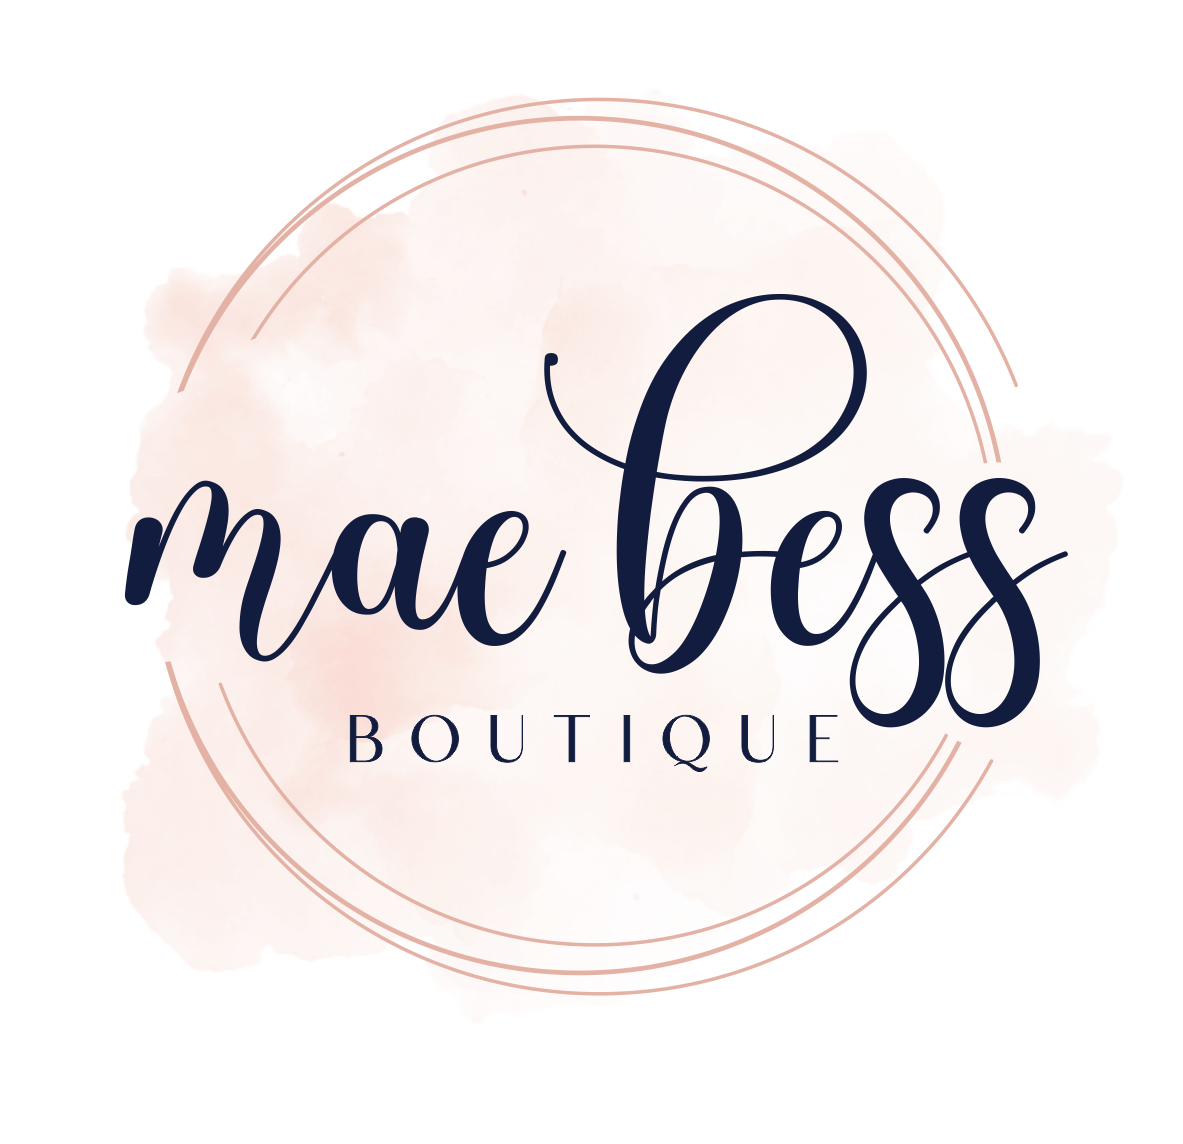 Mae Bess Boutique Gift Card